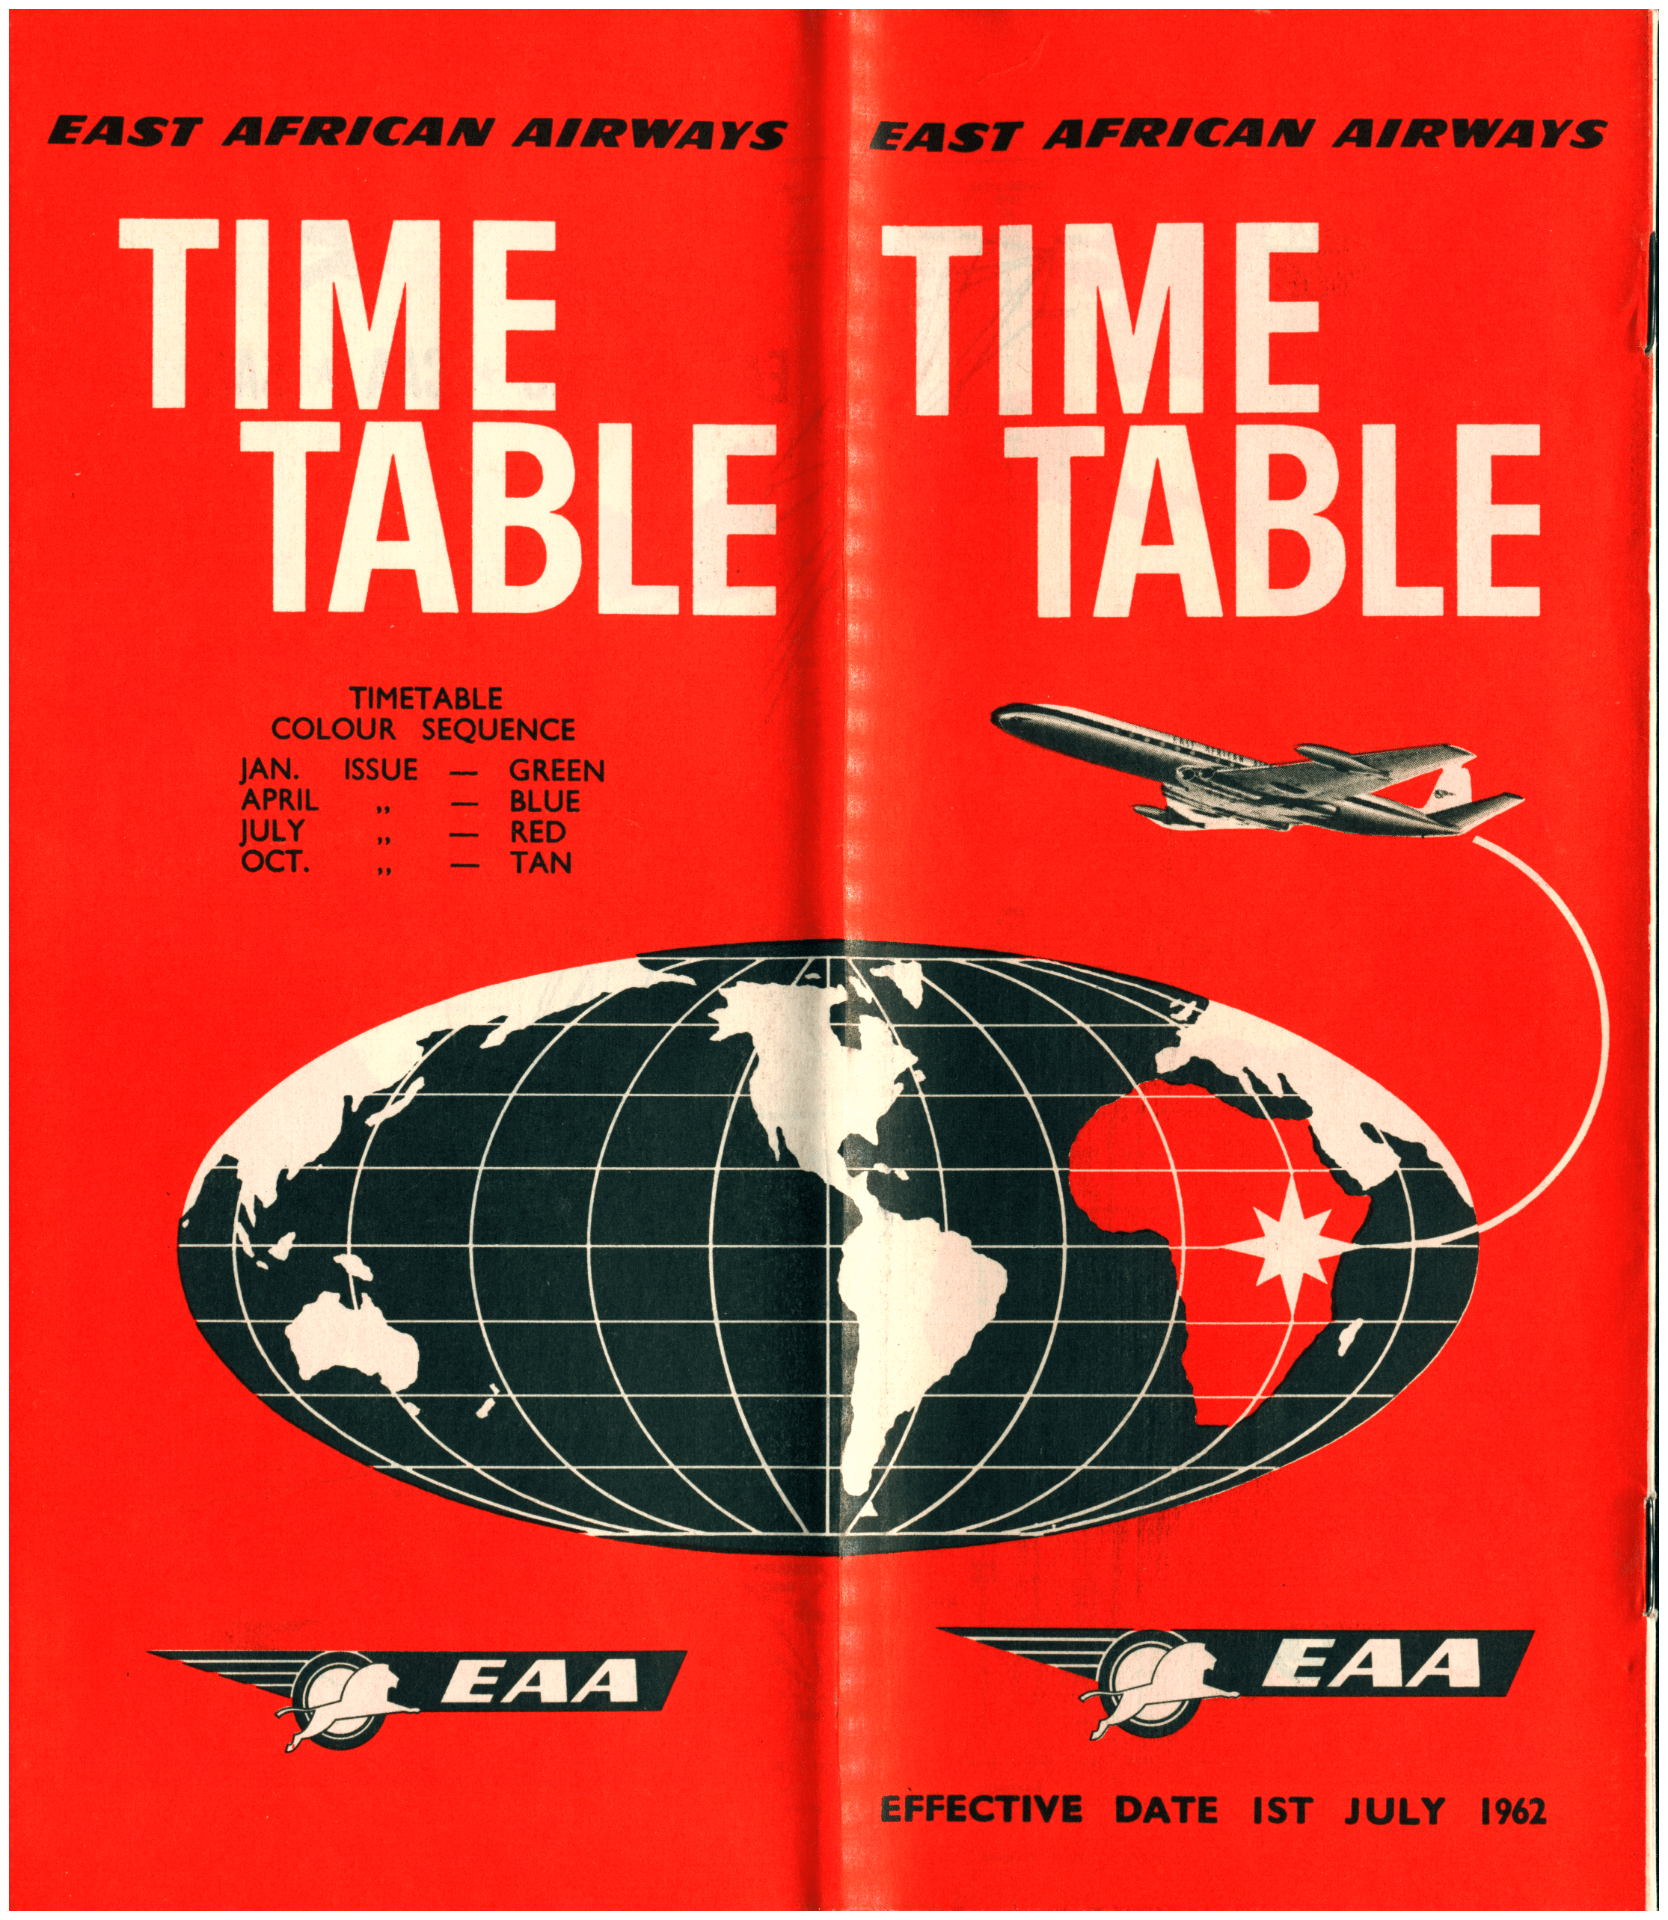 Cover of timetable with plane flying above a glove.